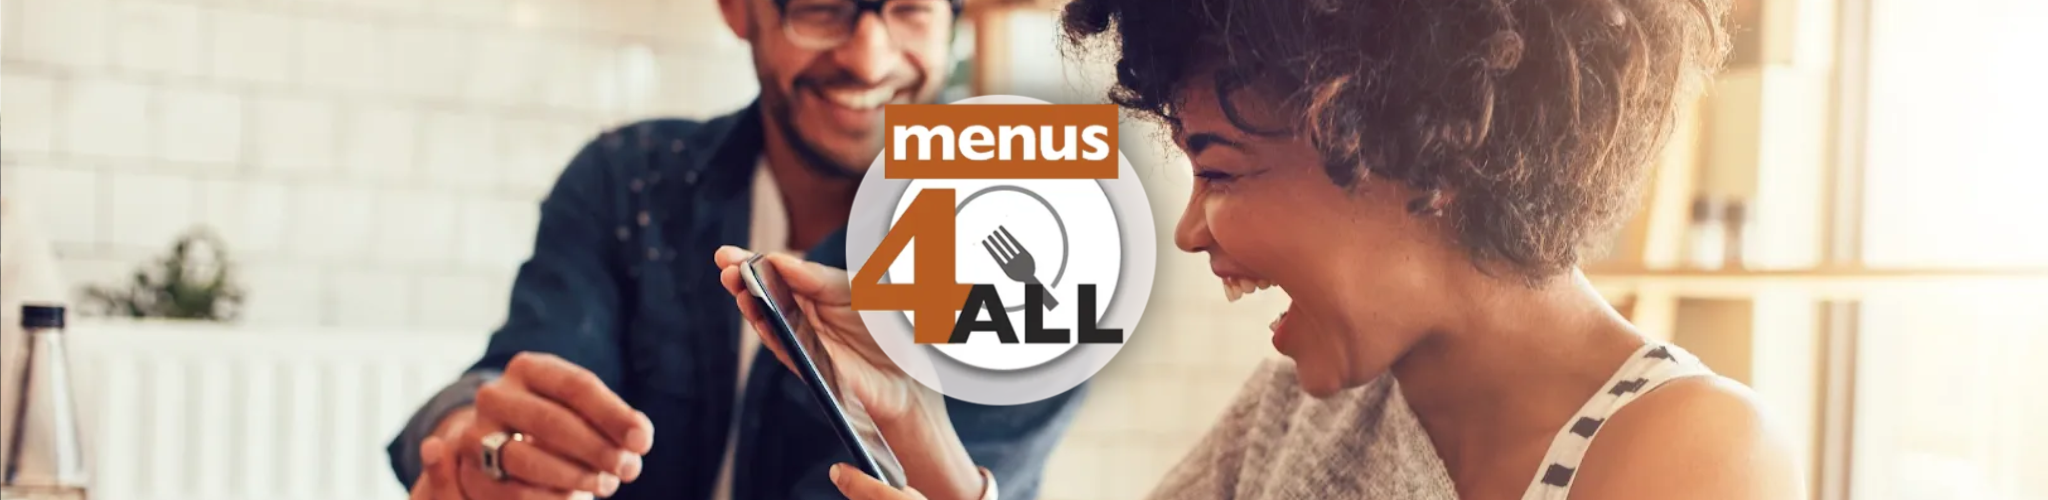 Young couple in restaurant with lady delighted with her phone. Menus 4 ALL logo